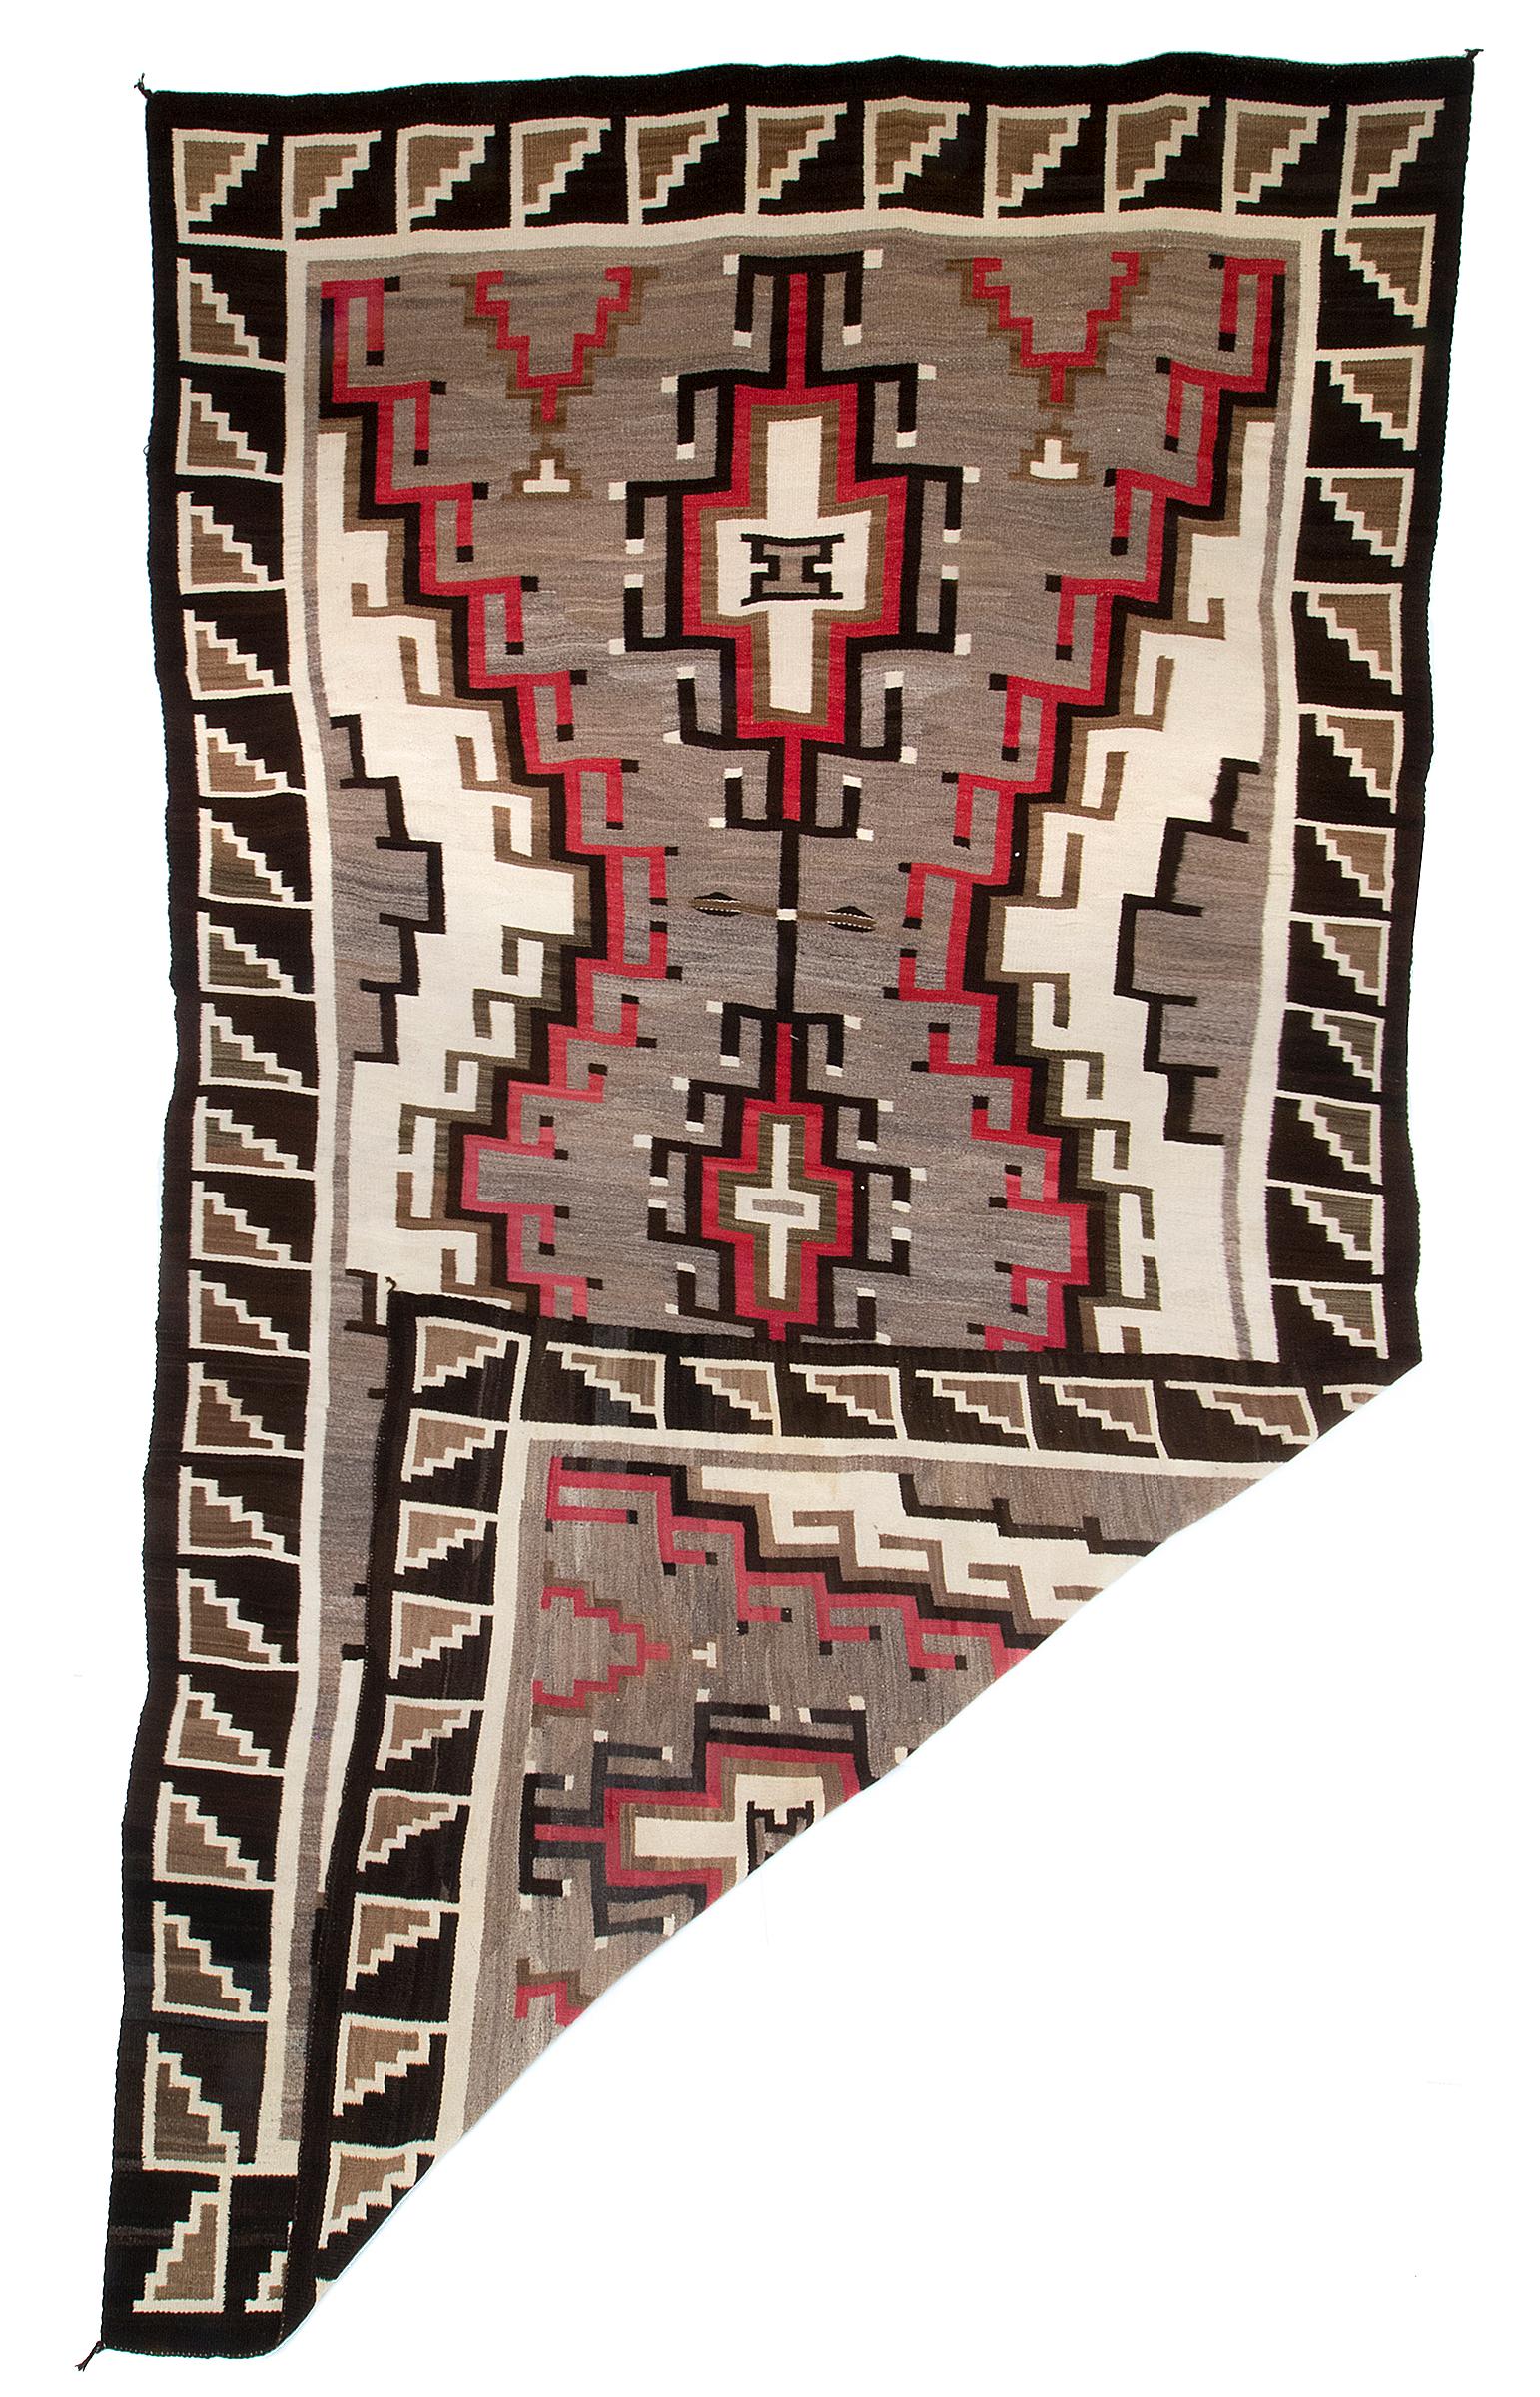 Large vintage Navajo Area Rug weaving from the Hubbell Trading Post in Ganado, Arizona (Southwestern United States). Woven of native hand-spun wool in natural fleece colors of brown/black, ivory/white, grey/brown with aniline dyed red. Hand woven by